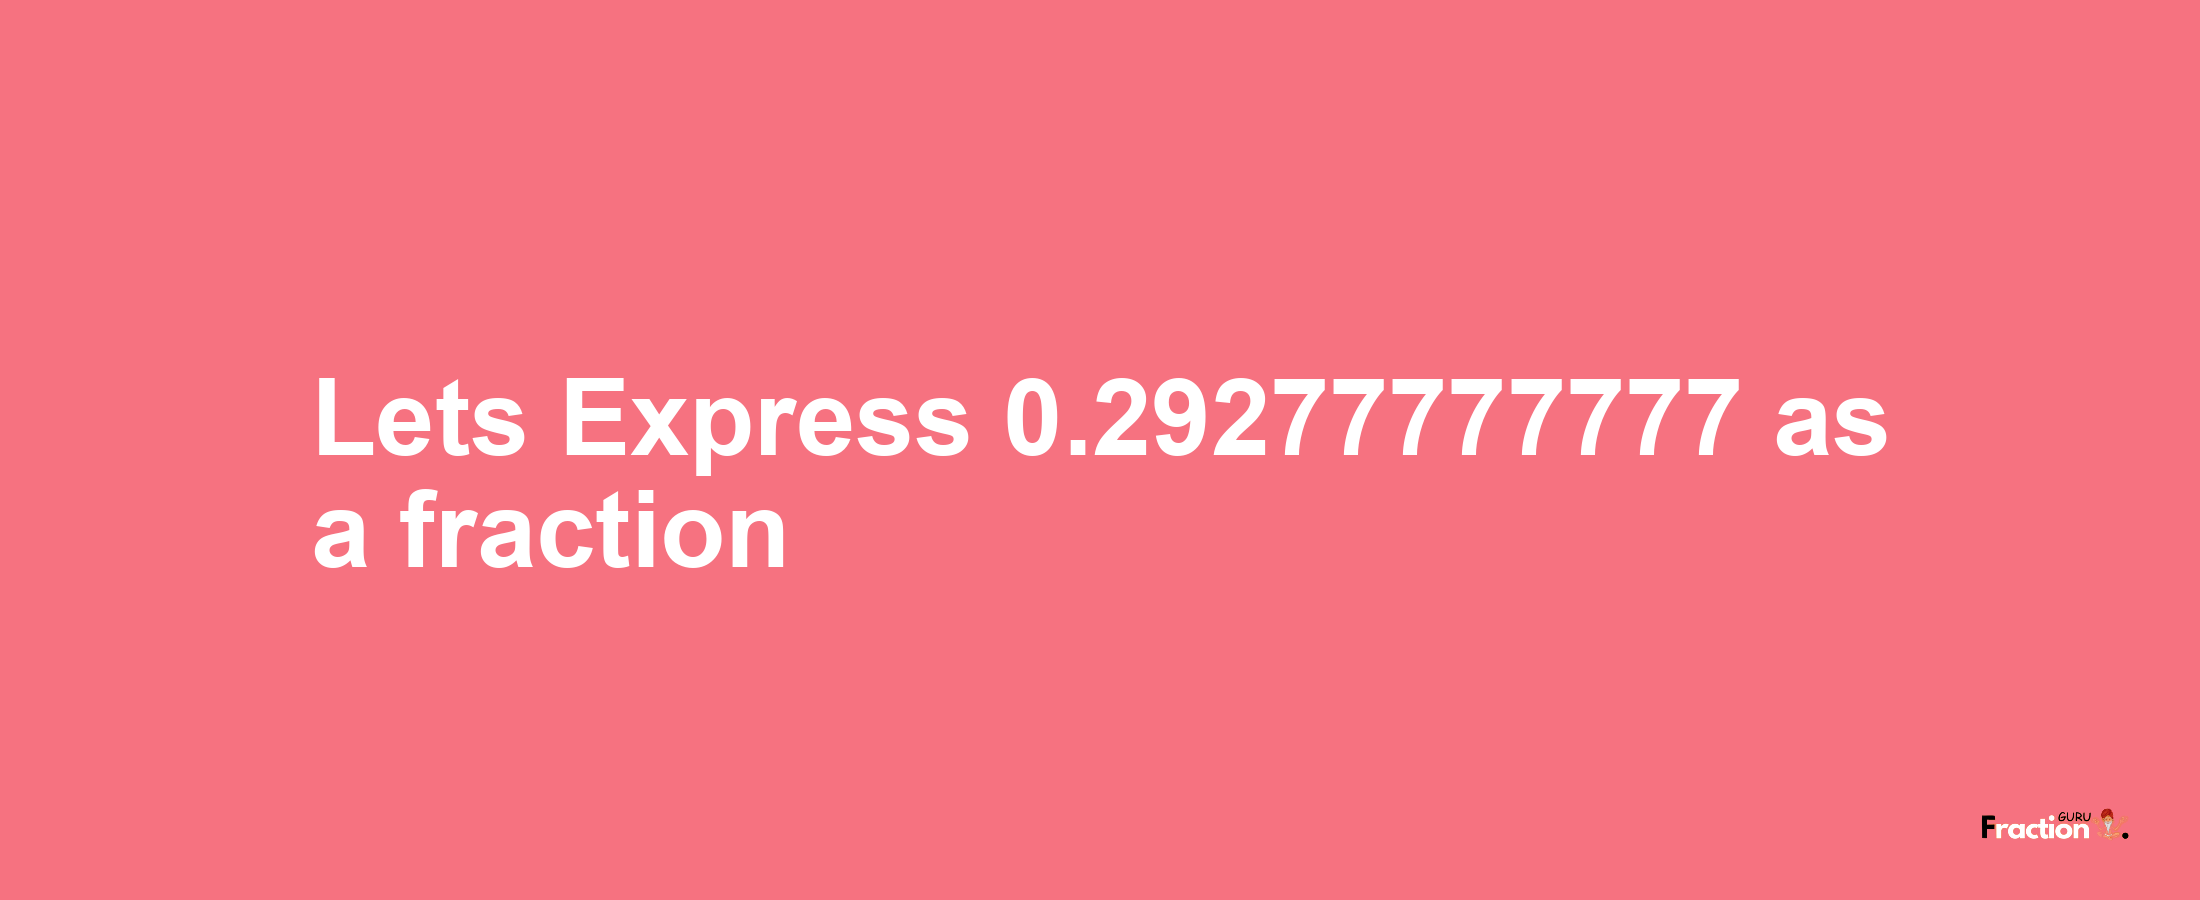 Lets Express 0.29277777777 as afraction